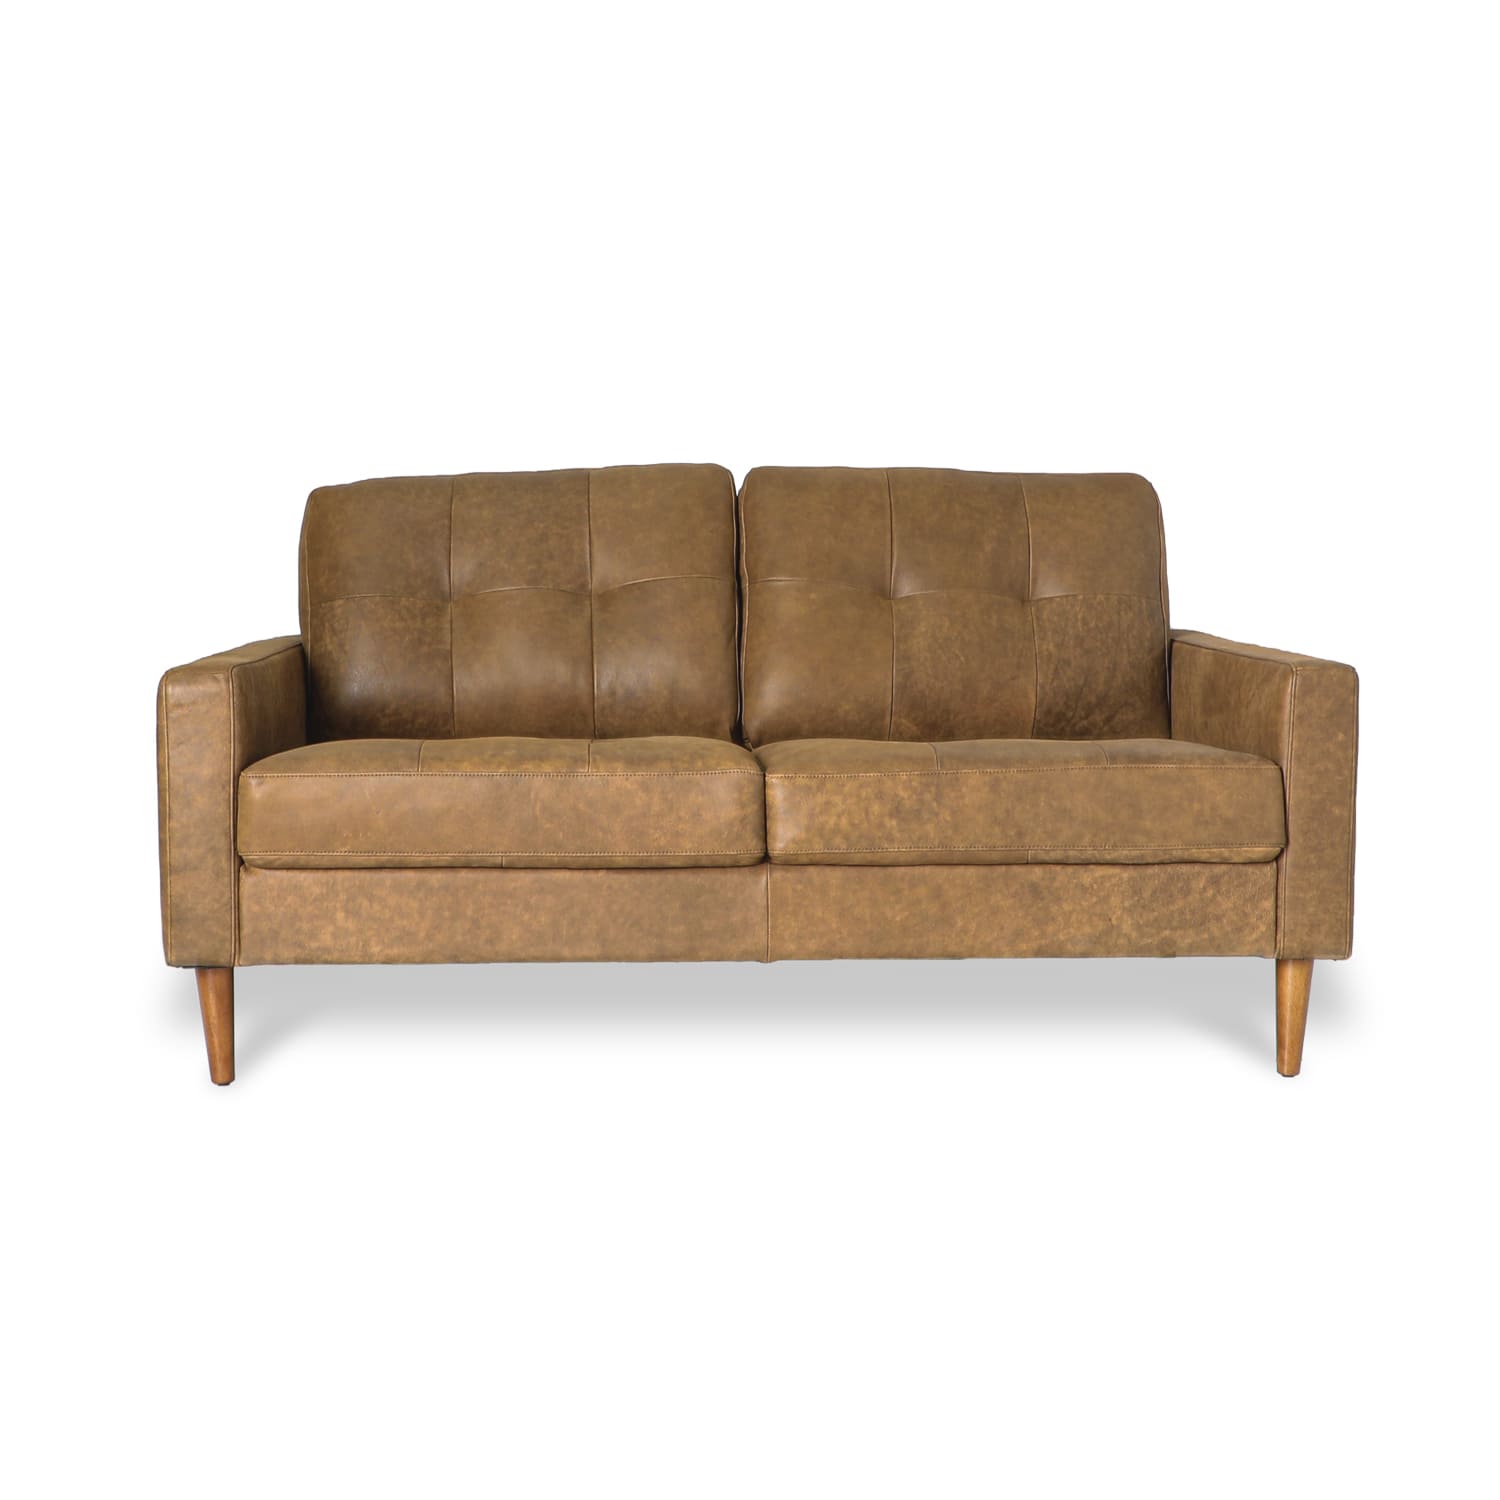 Imperfect Classic Leather 2.5 Seat in Brumby Natural